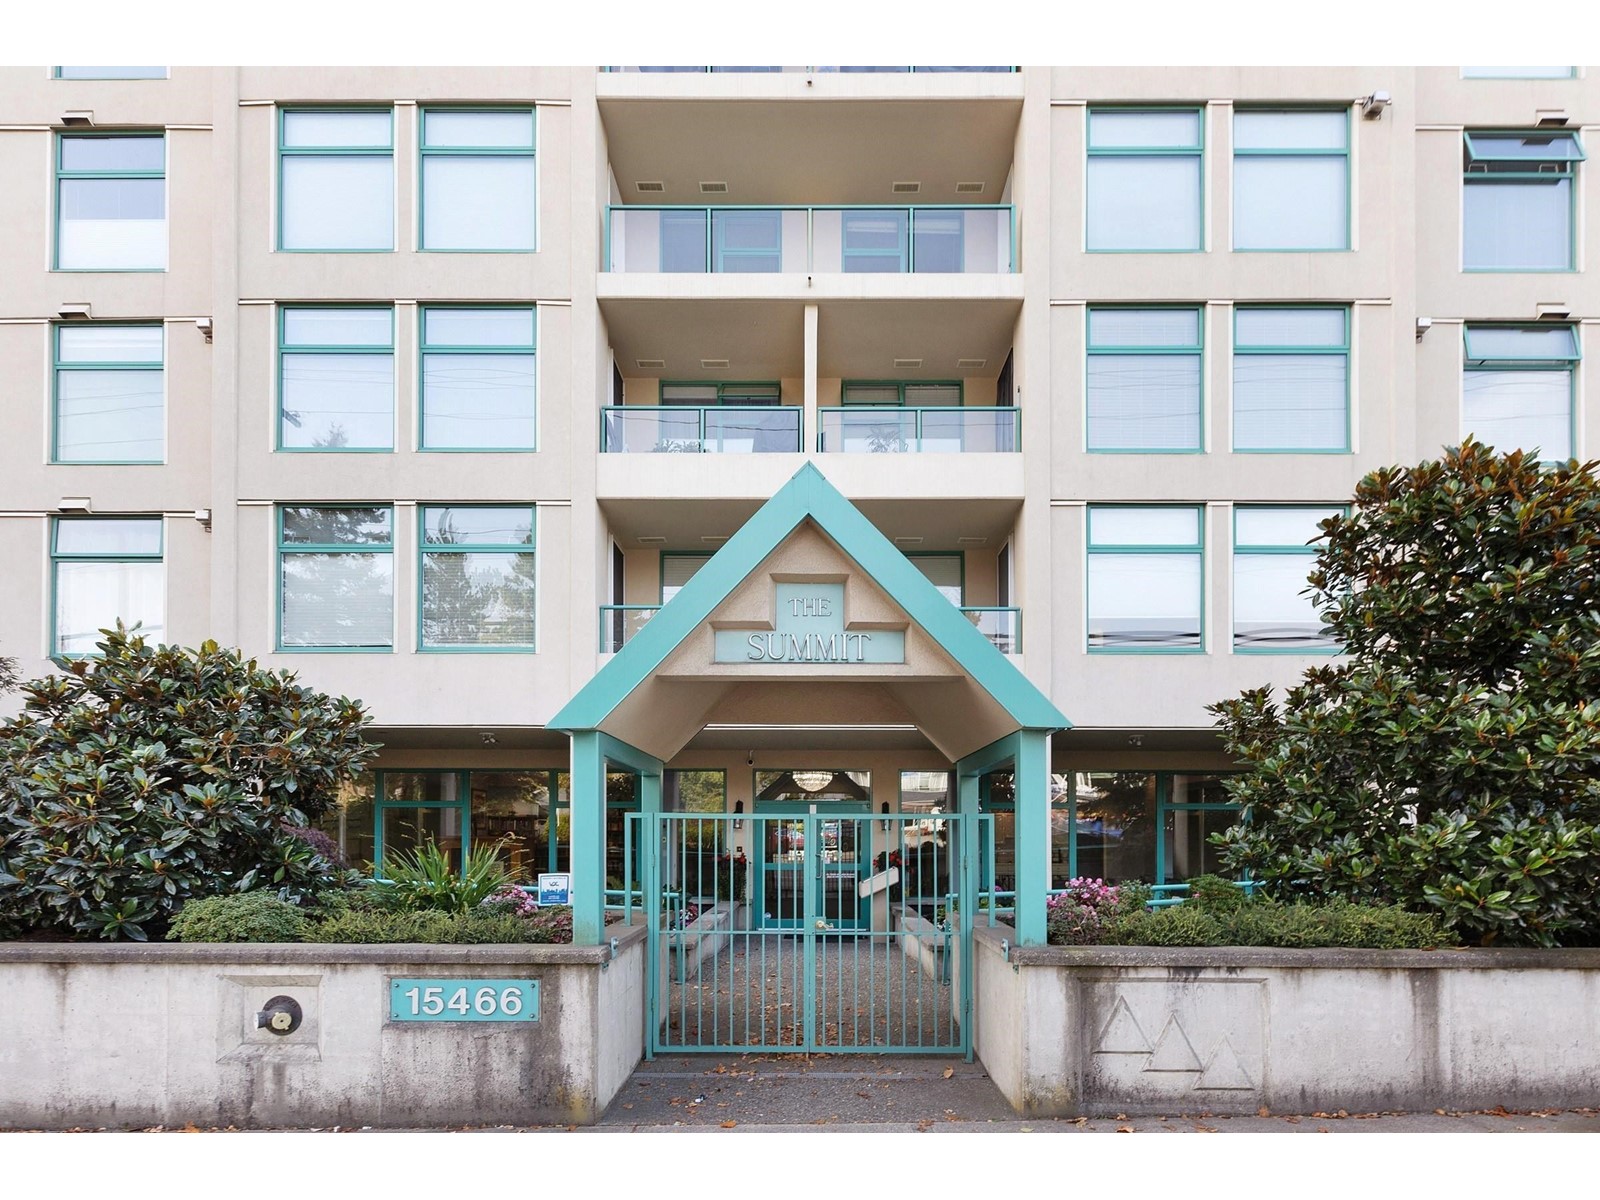 Listing Picture 33 of 33 : 401 15466 NORTH BLUFF ROAD, White Rock - 魯藝地產 Yvonne Lu Group - MLS Medallion Club Member